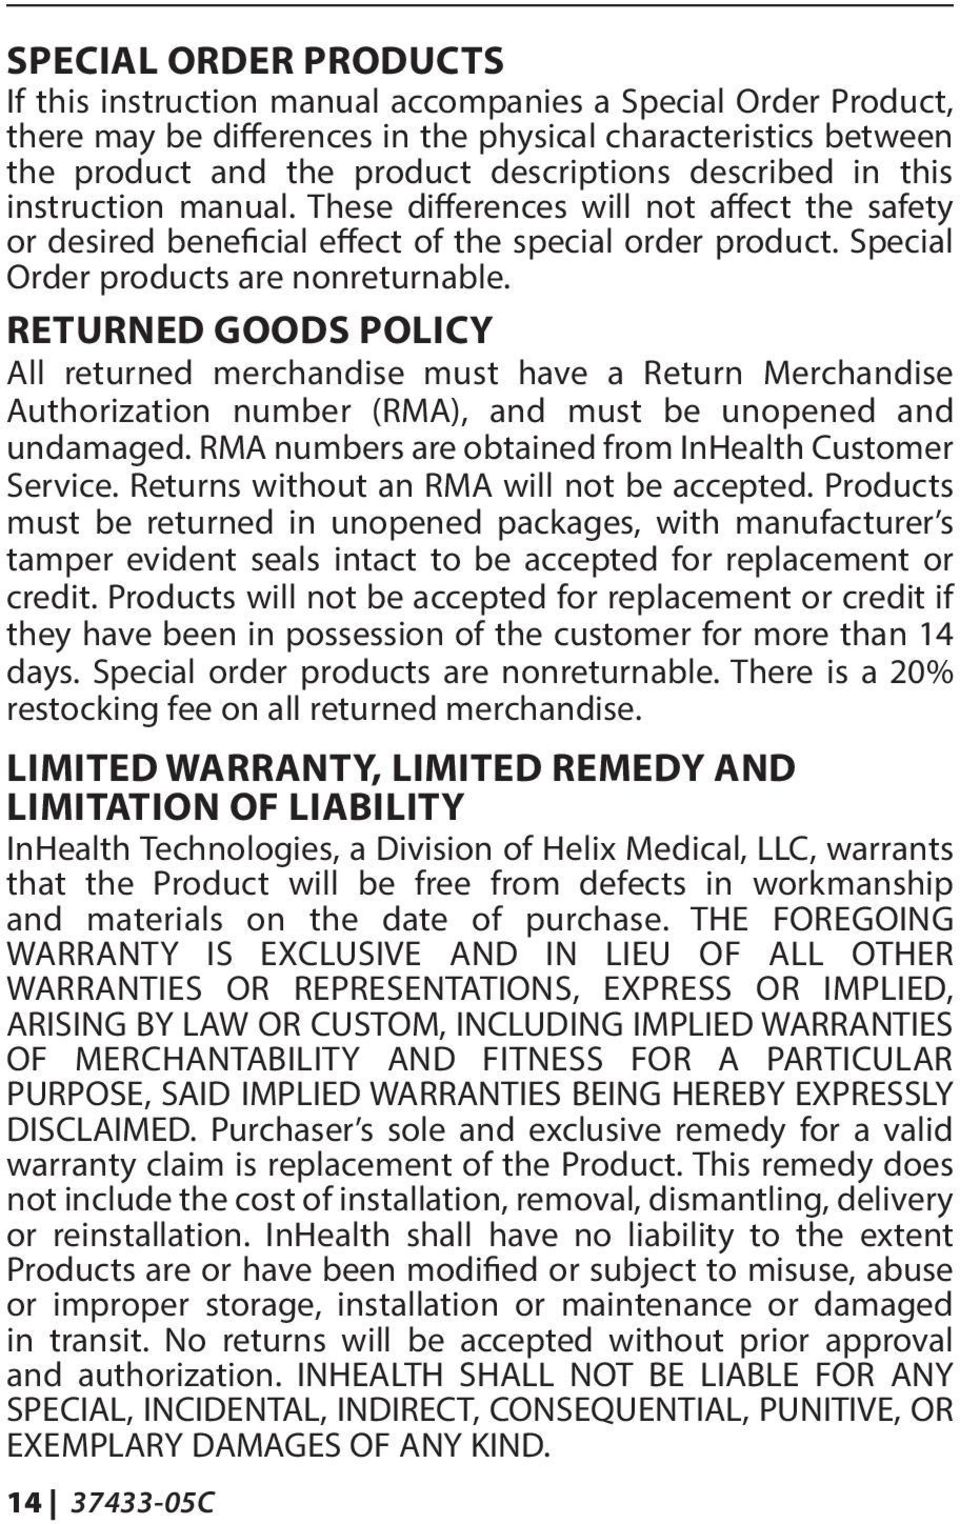 RETURNED GOODS POLICY All returned merchandise must have a Return Merchandise Authorization number (RMA), and must be unopened and undamaged. RMA numbers are obtained from InHealth Customer Service.